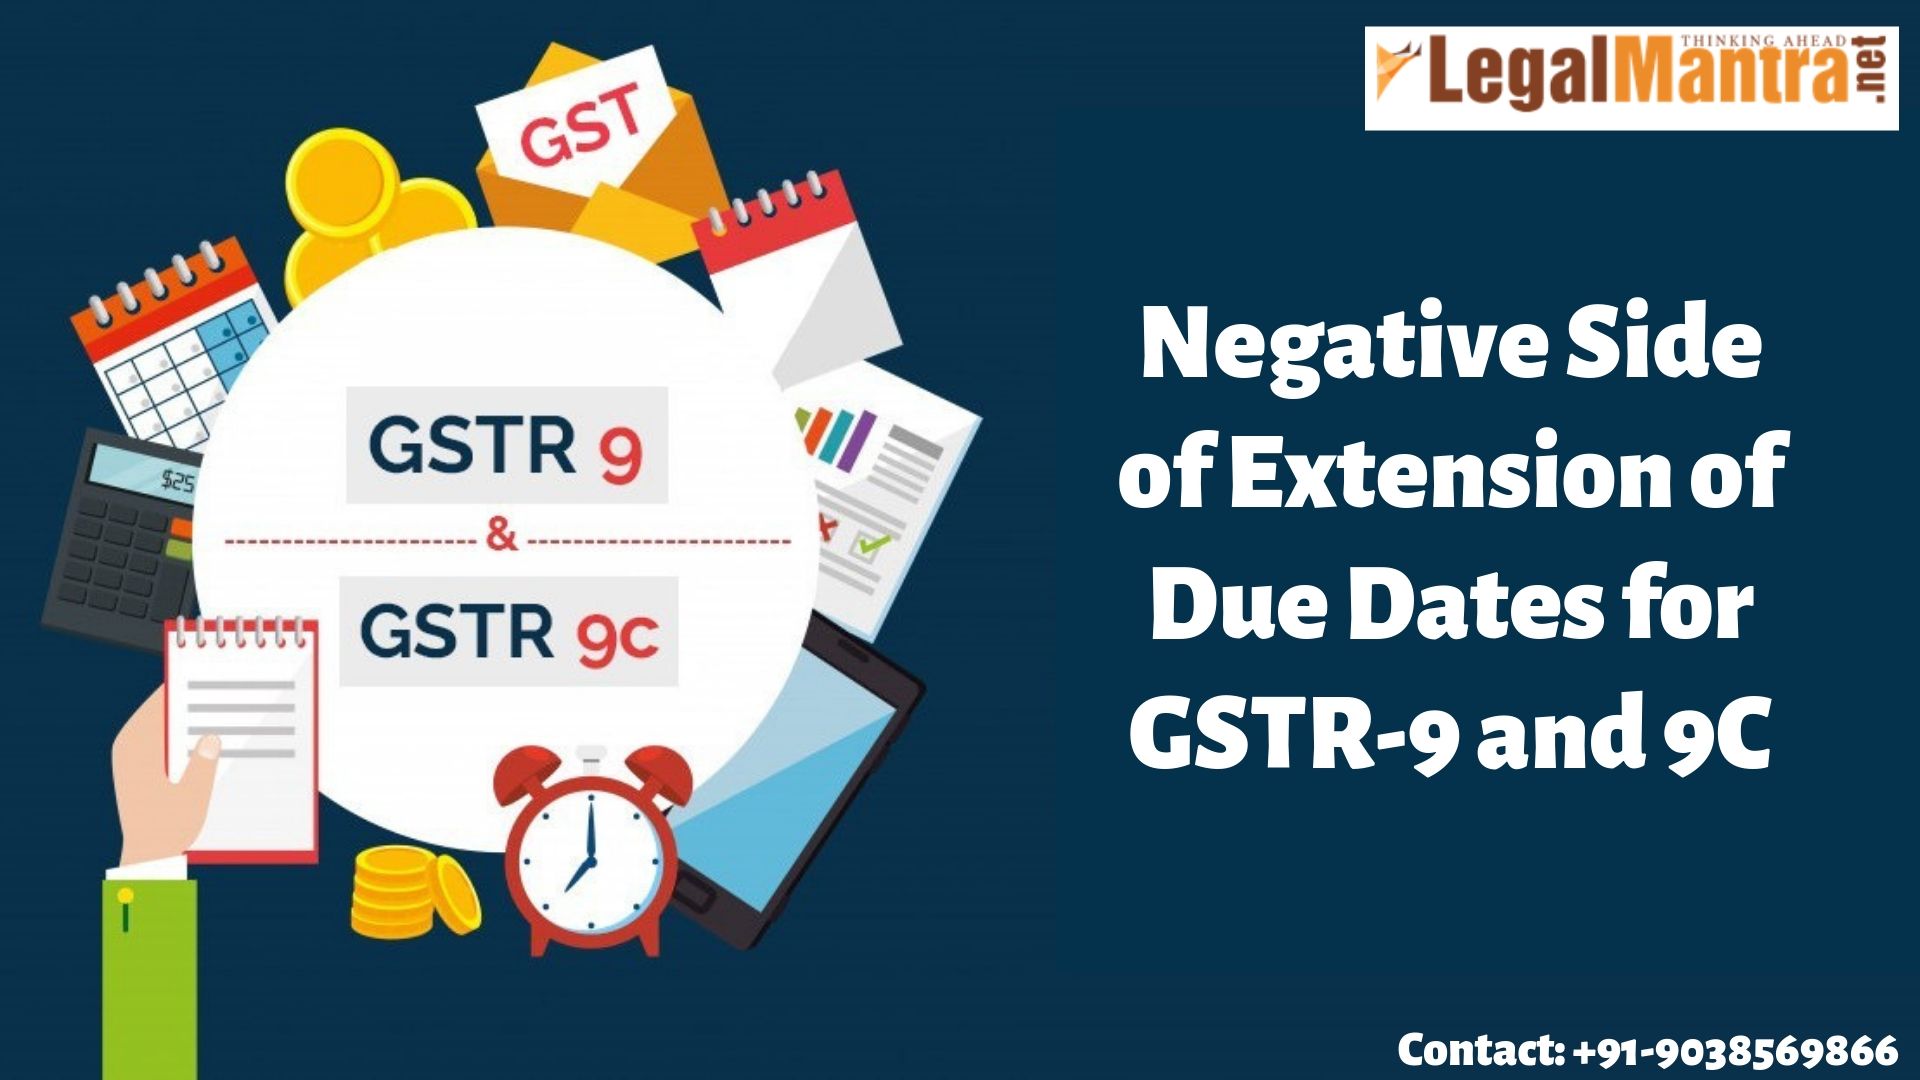 Negative Side of Extension of Due Dates for GSTR-9 and 9C